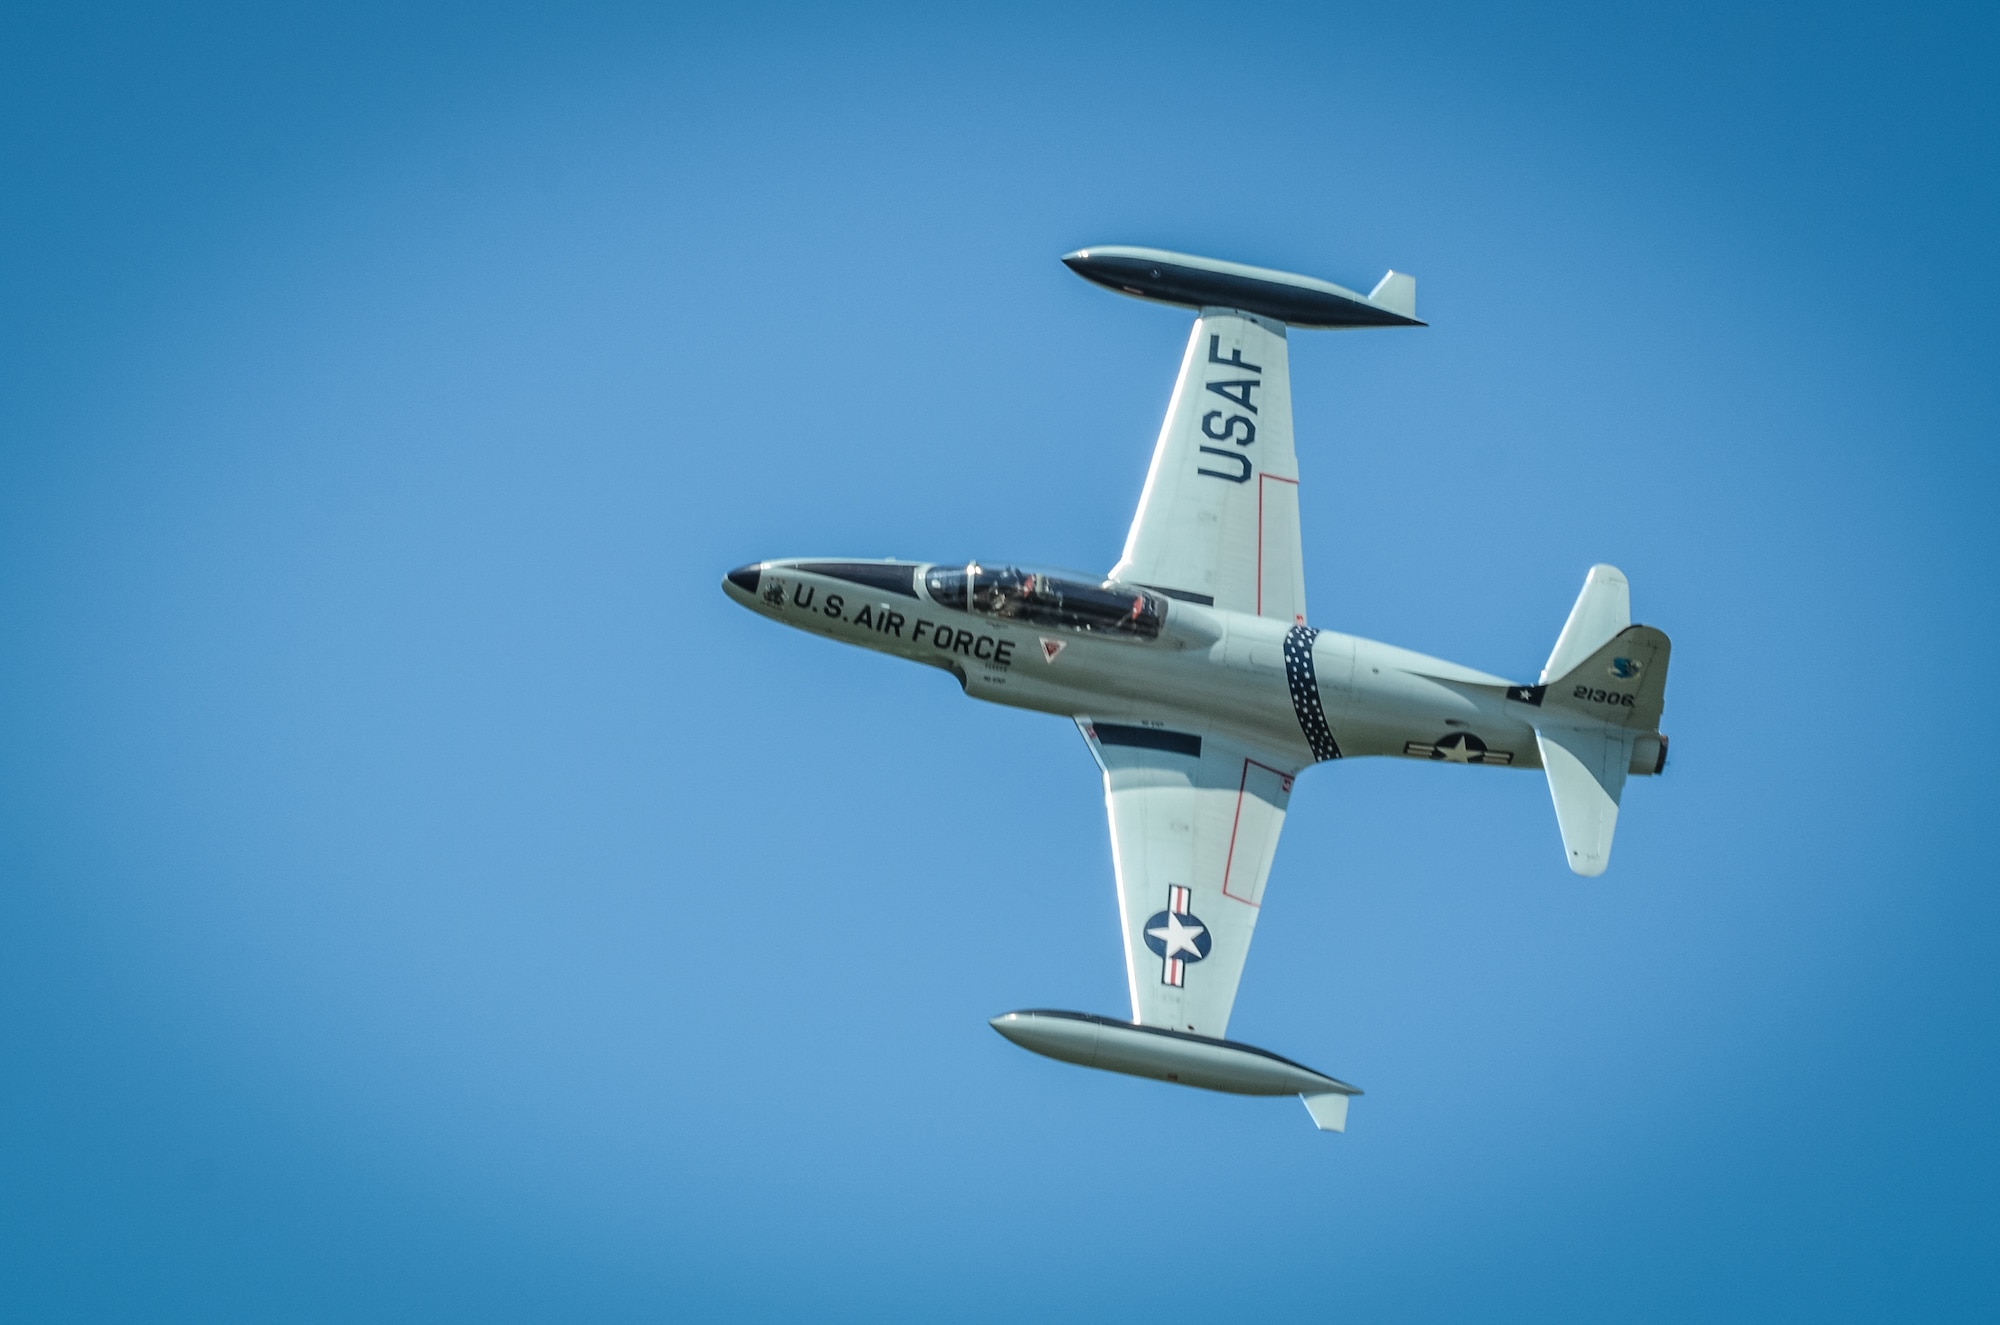 A T-33 Shooting Star aircraft flies overhead during the Sound of Speed Airshow at Rosecrans Air National Guard Base, St. Joseph, Mo., August 26, 2018. The air show was hosted by the 139th Airlift Wing, Missouri Air National Guard and the city of St. Joseph to thank the community for their support. The air show committee estimated 45,000 people attended the Saturday performance. (U.S. Air National Guard photo by Staff Sgt. Patrick Evenson)